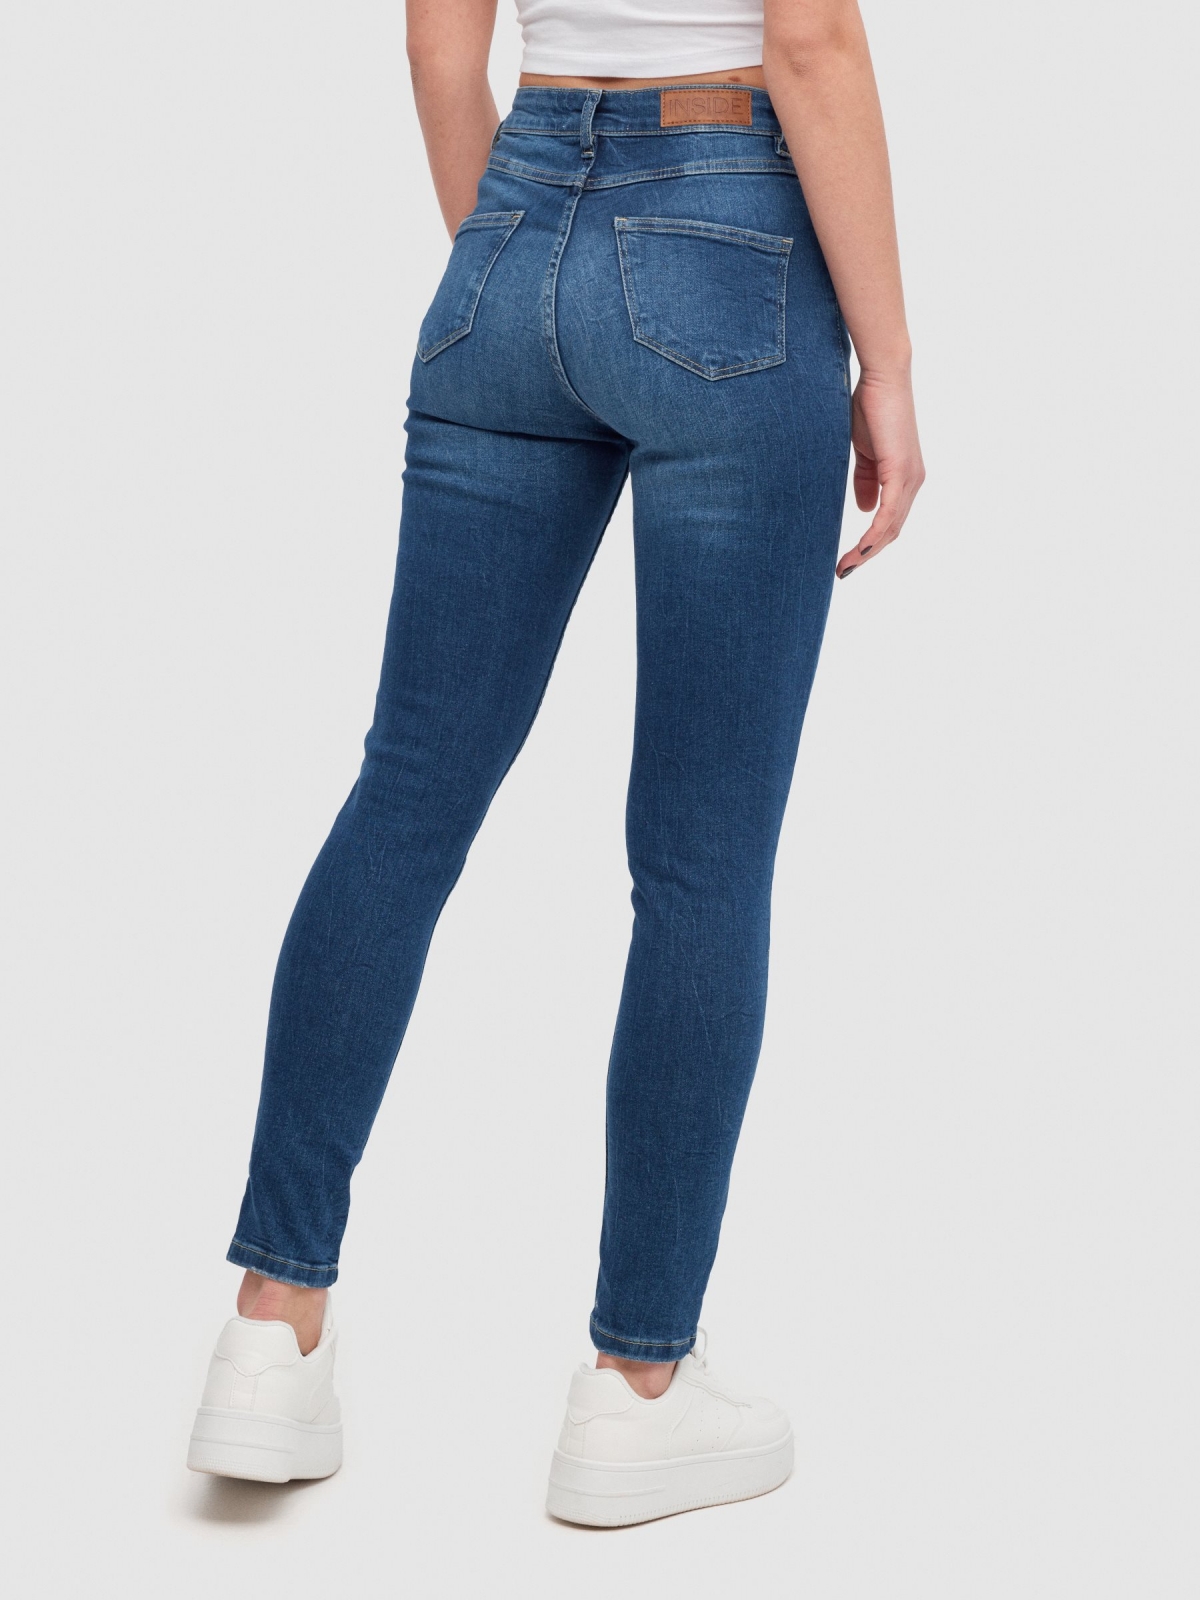 Ripped mid-rise skinny jeans dark blue middle back view